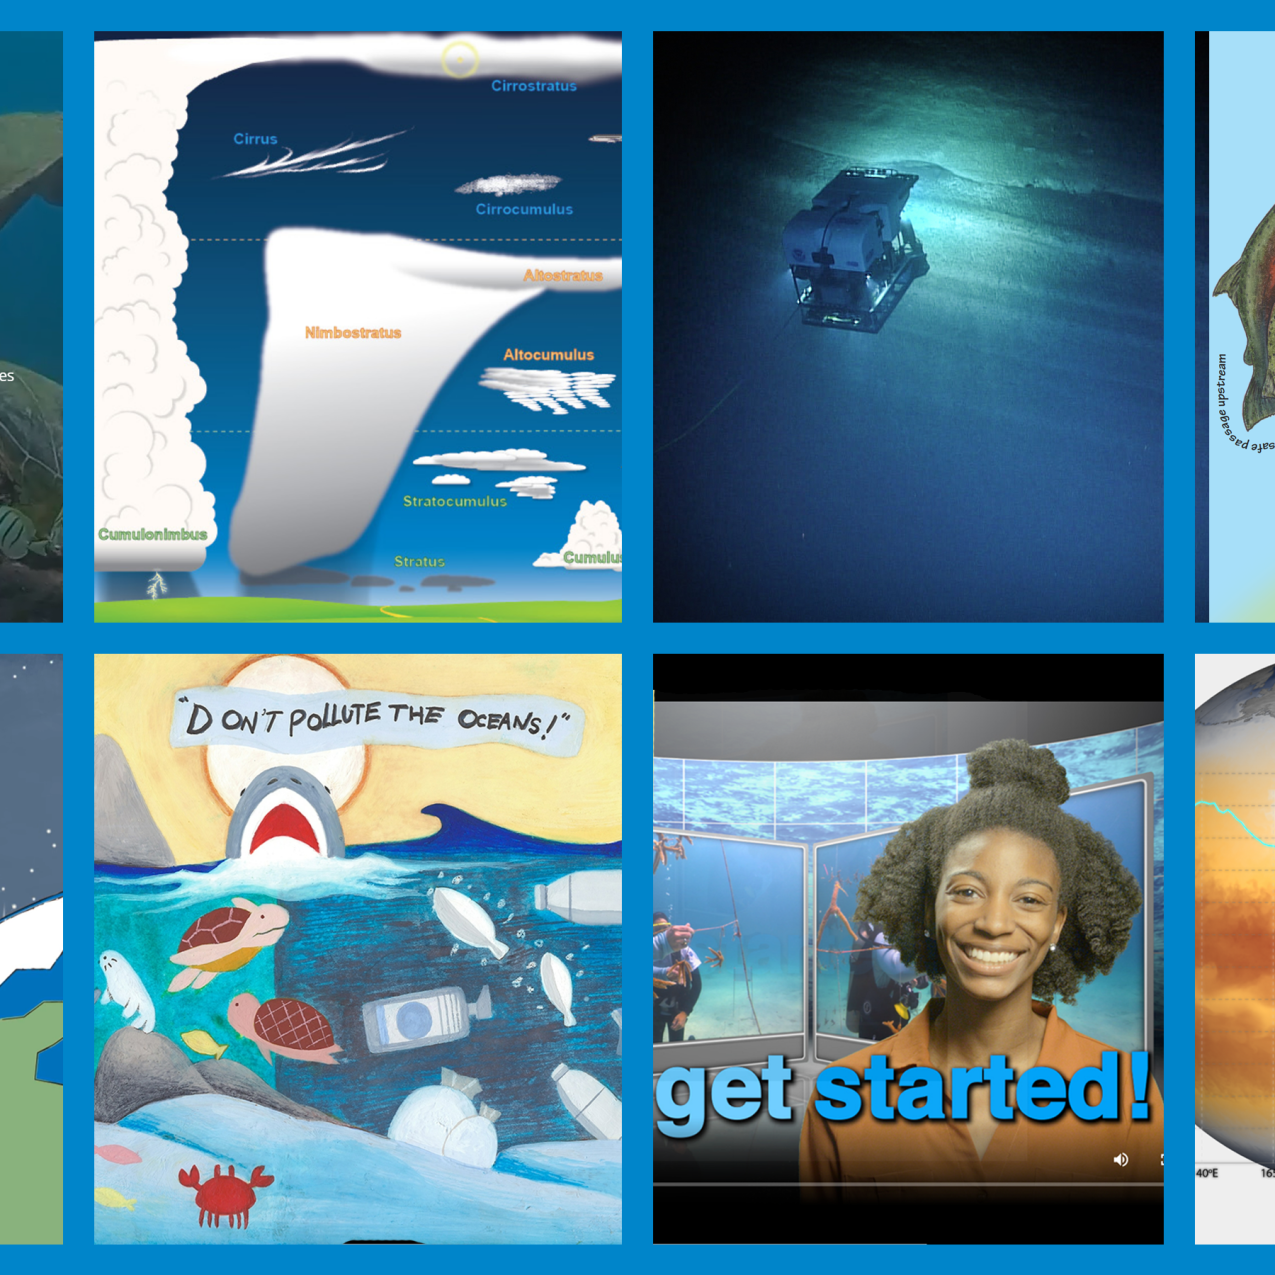 A collage of eight images of NOAA educational resources. Clockwise: sea turtles in a reef with text "Sanctuaries 360: Explore the Blue", a drawing of the ten basic clouds, an ROV in the deep ocean, a drawing of the salmon life cycle, a drawing of a satellite above Earth, a winning marine debris art contest entry with the text "Don't pollute the oceans!", a woman standing in front of two screens with the text "get started!", and a data visualization of two Earths showing different sea surface temperatures.